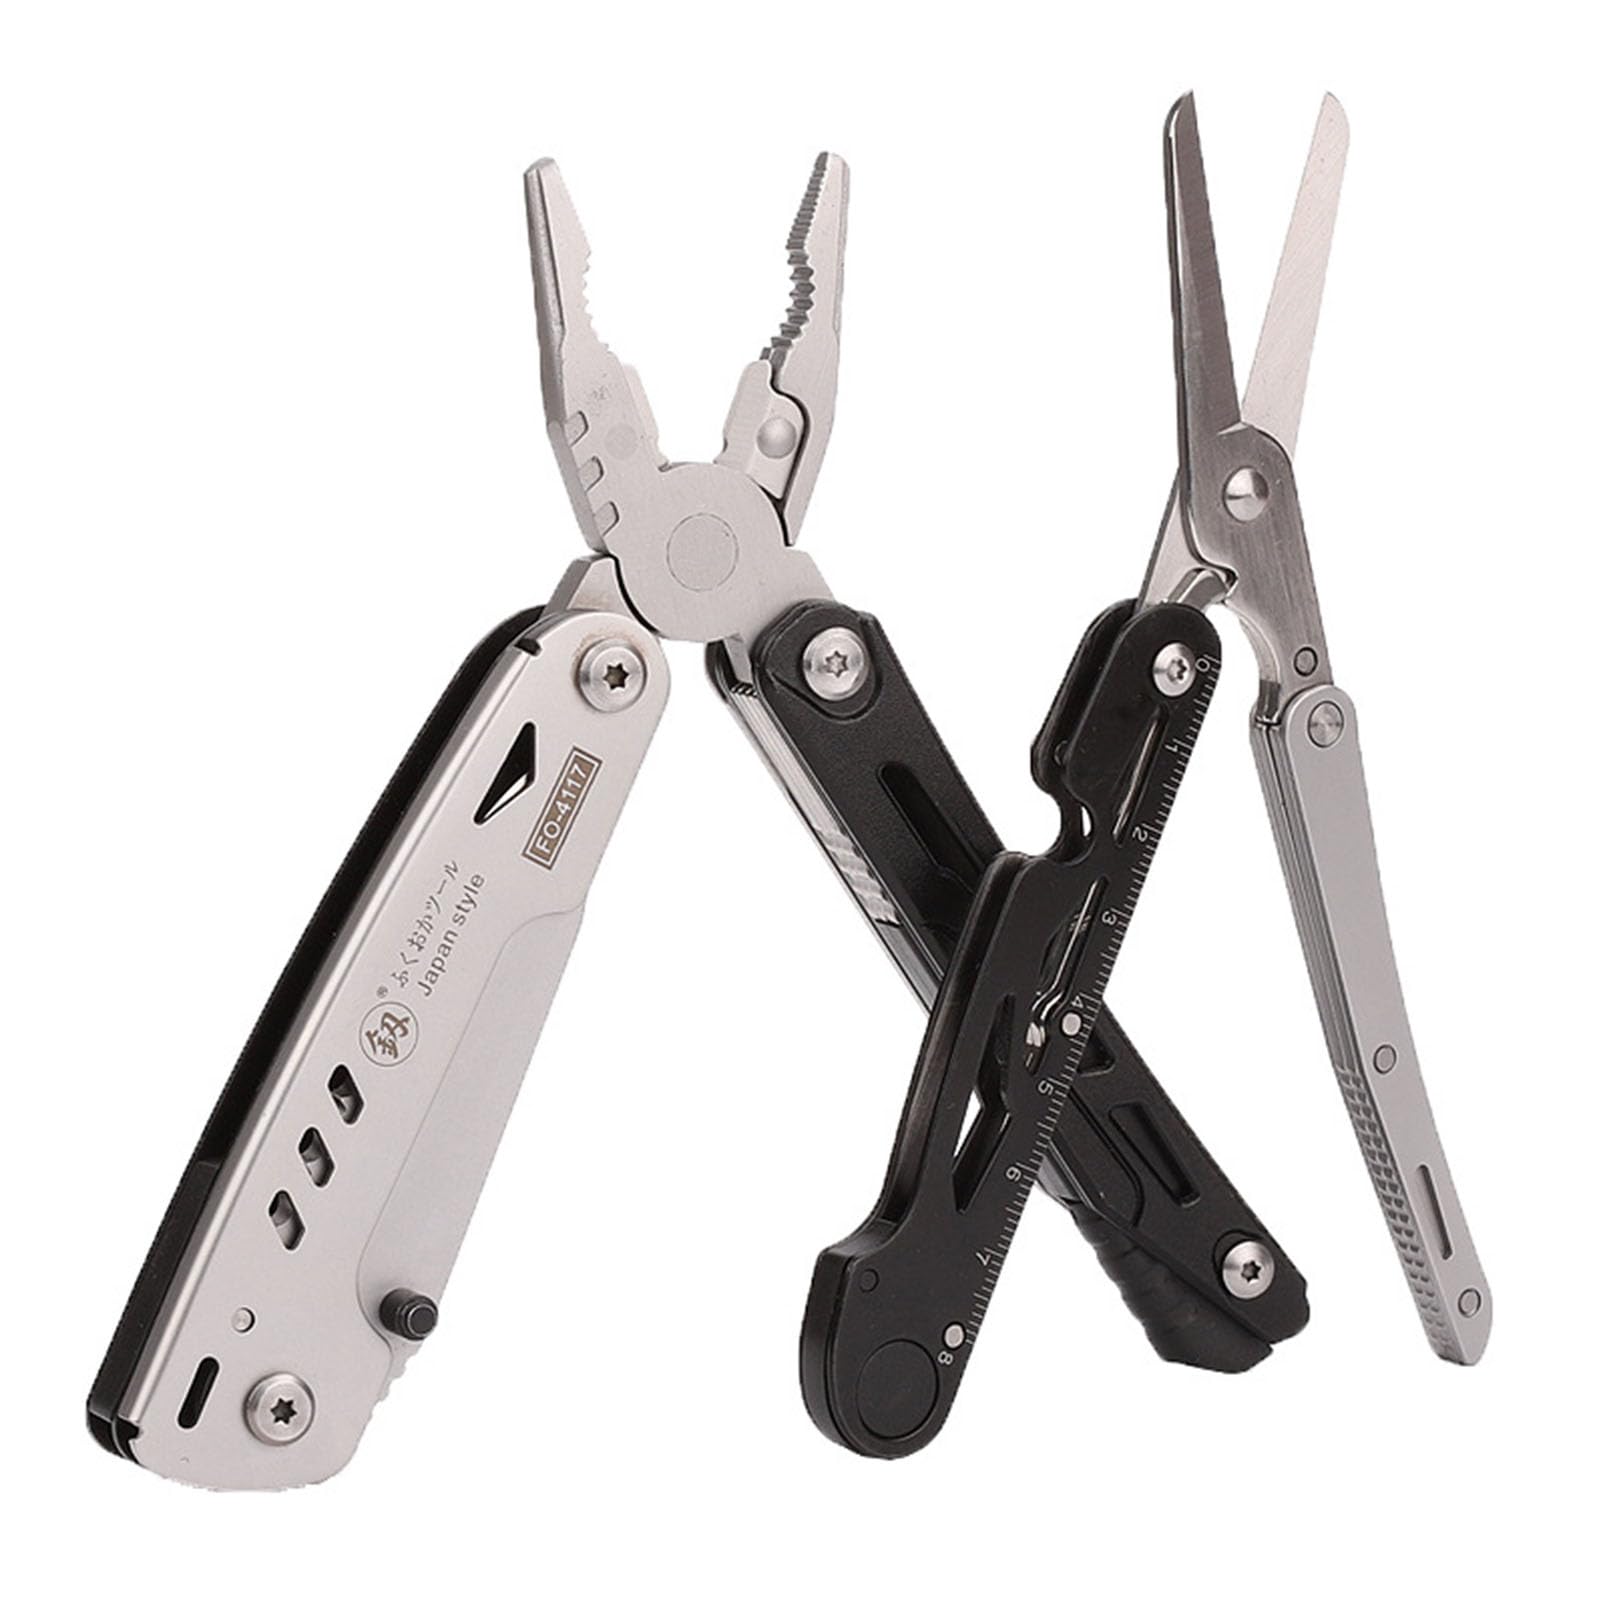 Pocket Multitool - Versatile Men's Utility Tool with Large Scissors - Ideal for Survival, Camping, Fishing, and BBQ Adventures